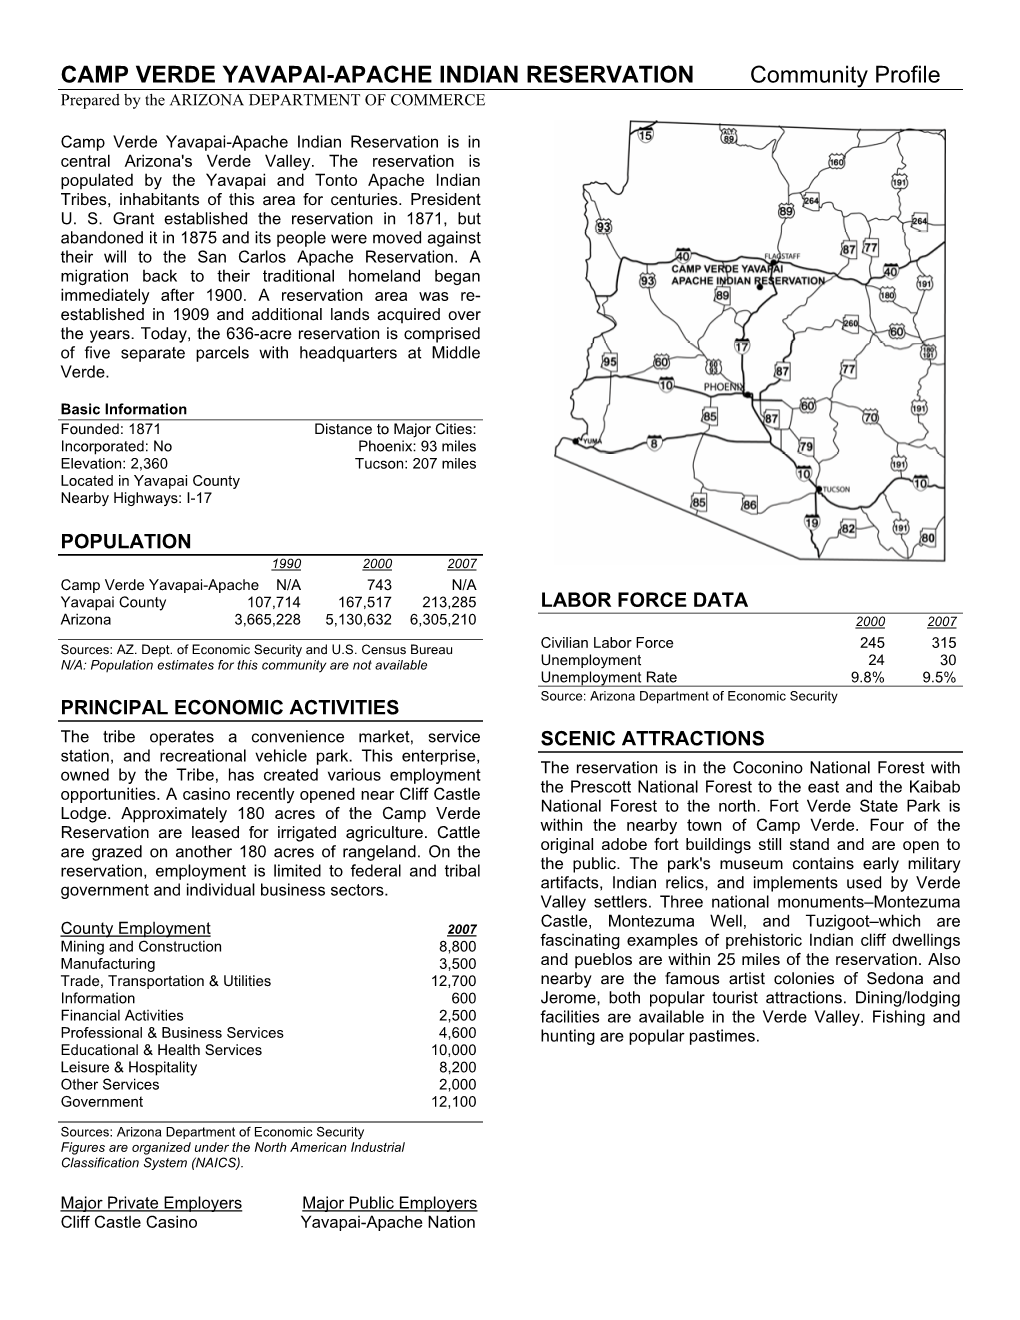 CAMP VERDE YAVAPAI-APACHE INDIAN RESERVATION Community Profile Prepared by the ARIZONA DEPARTMENT of COMMERCE